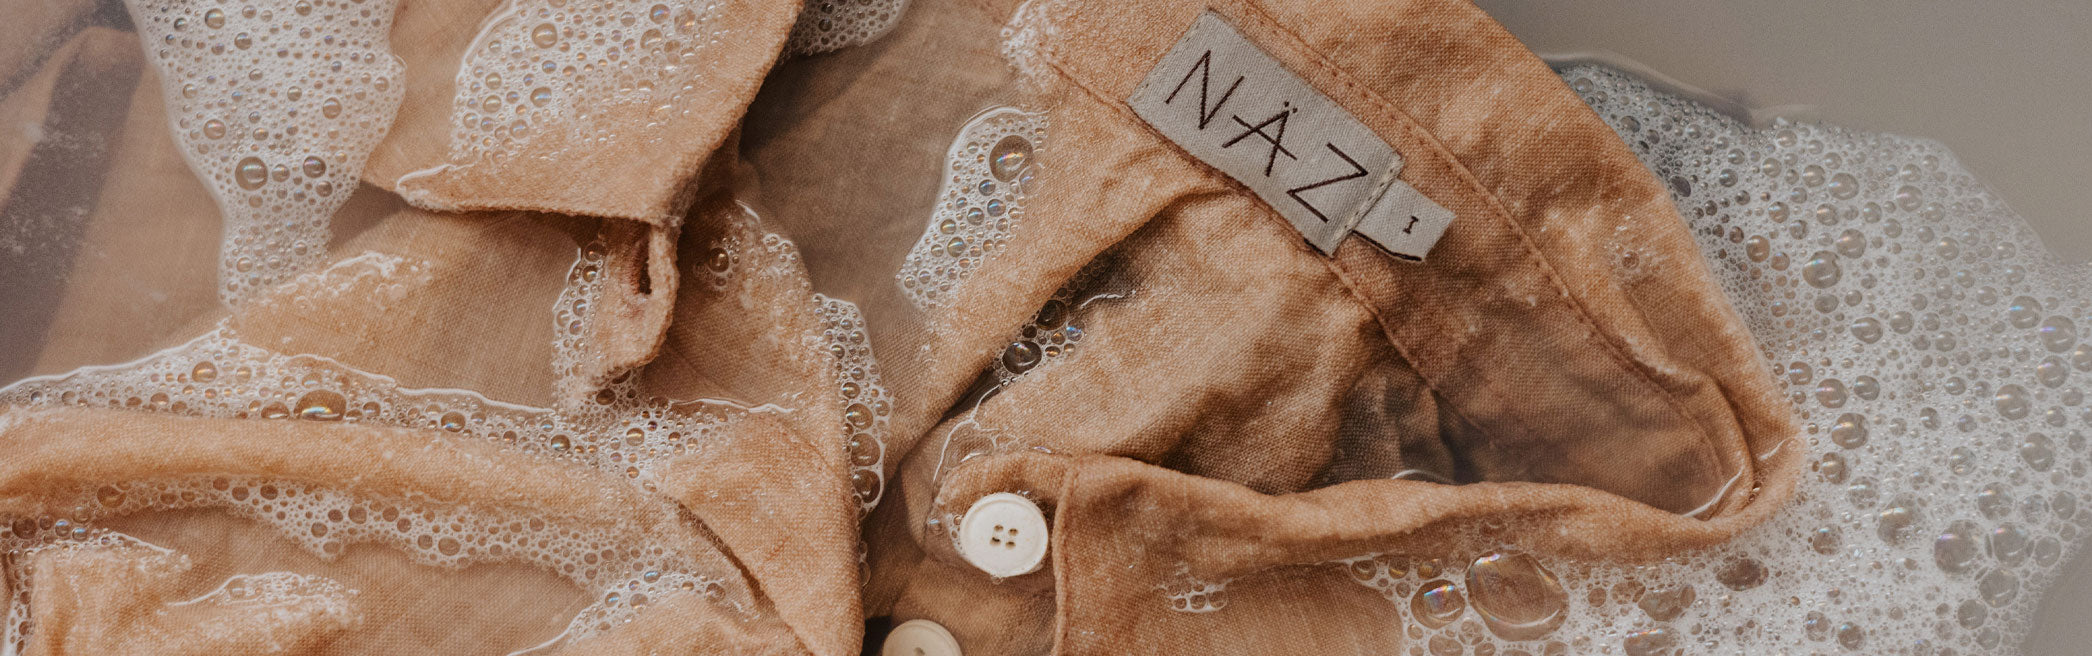 Naz care guide. Sustainable tips to make your clothes last longer. 